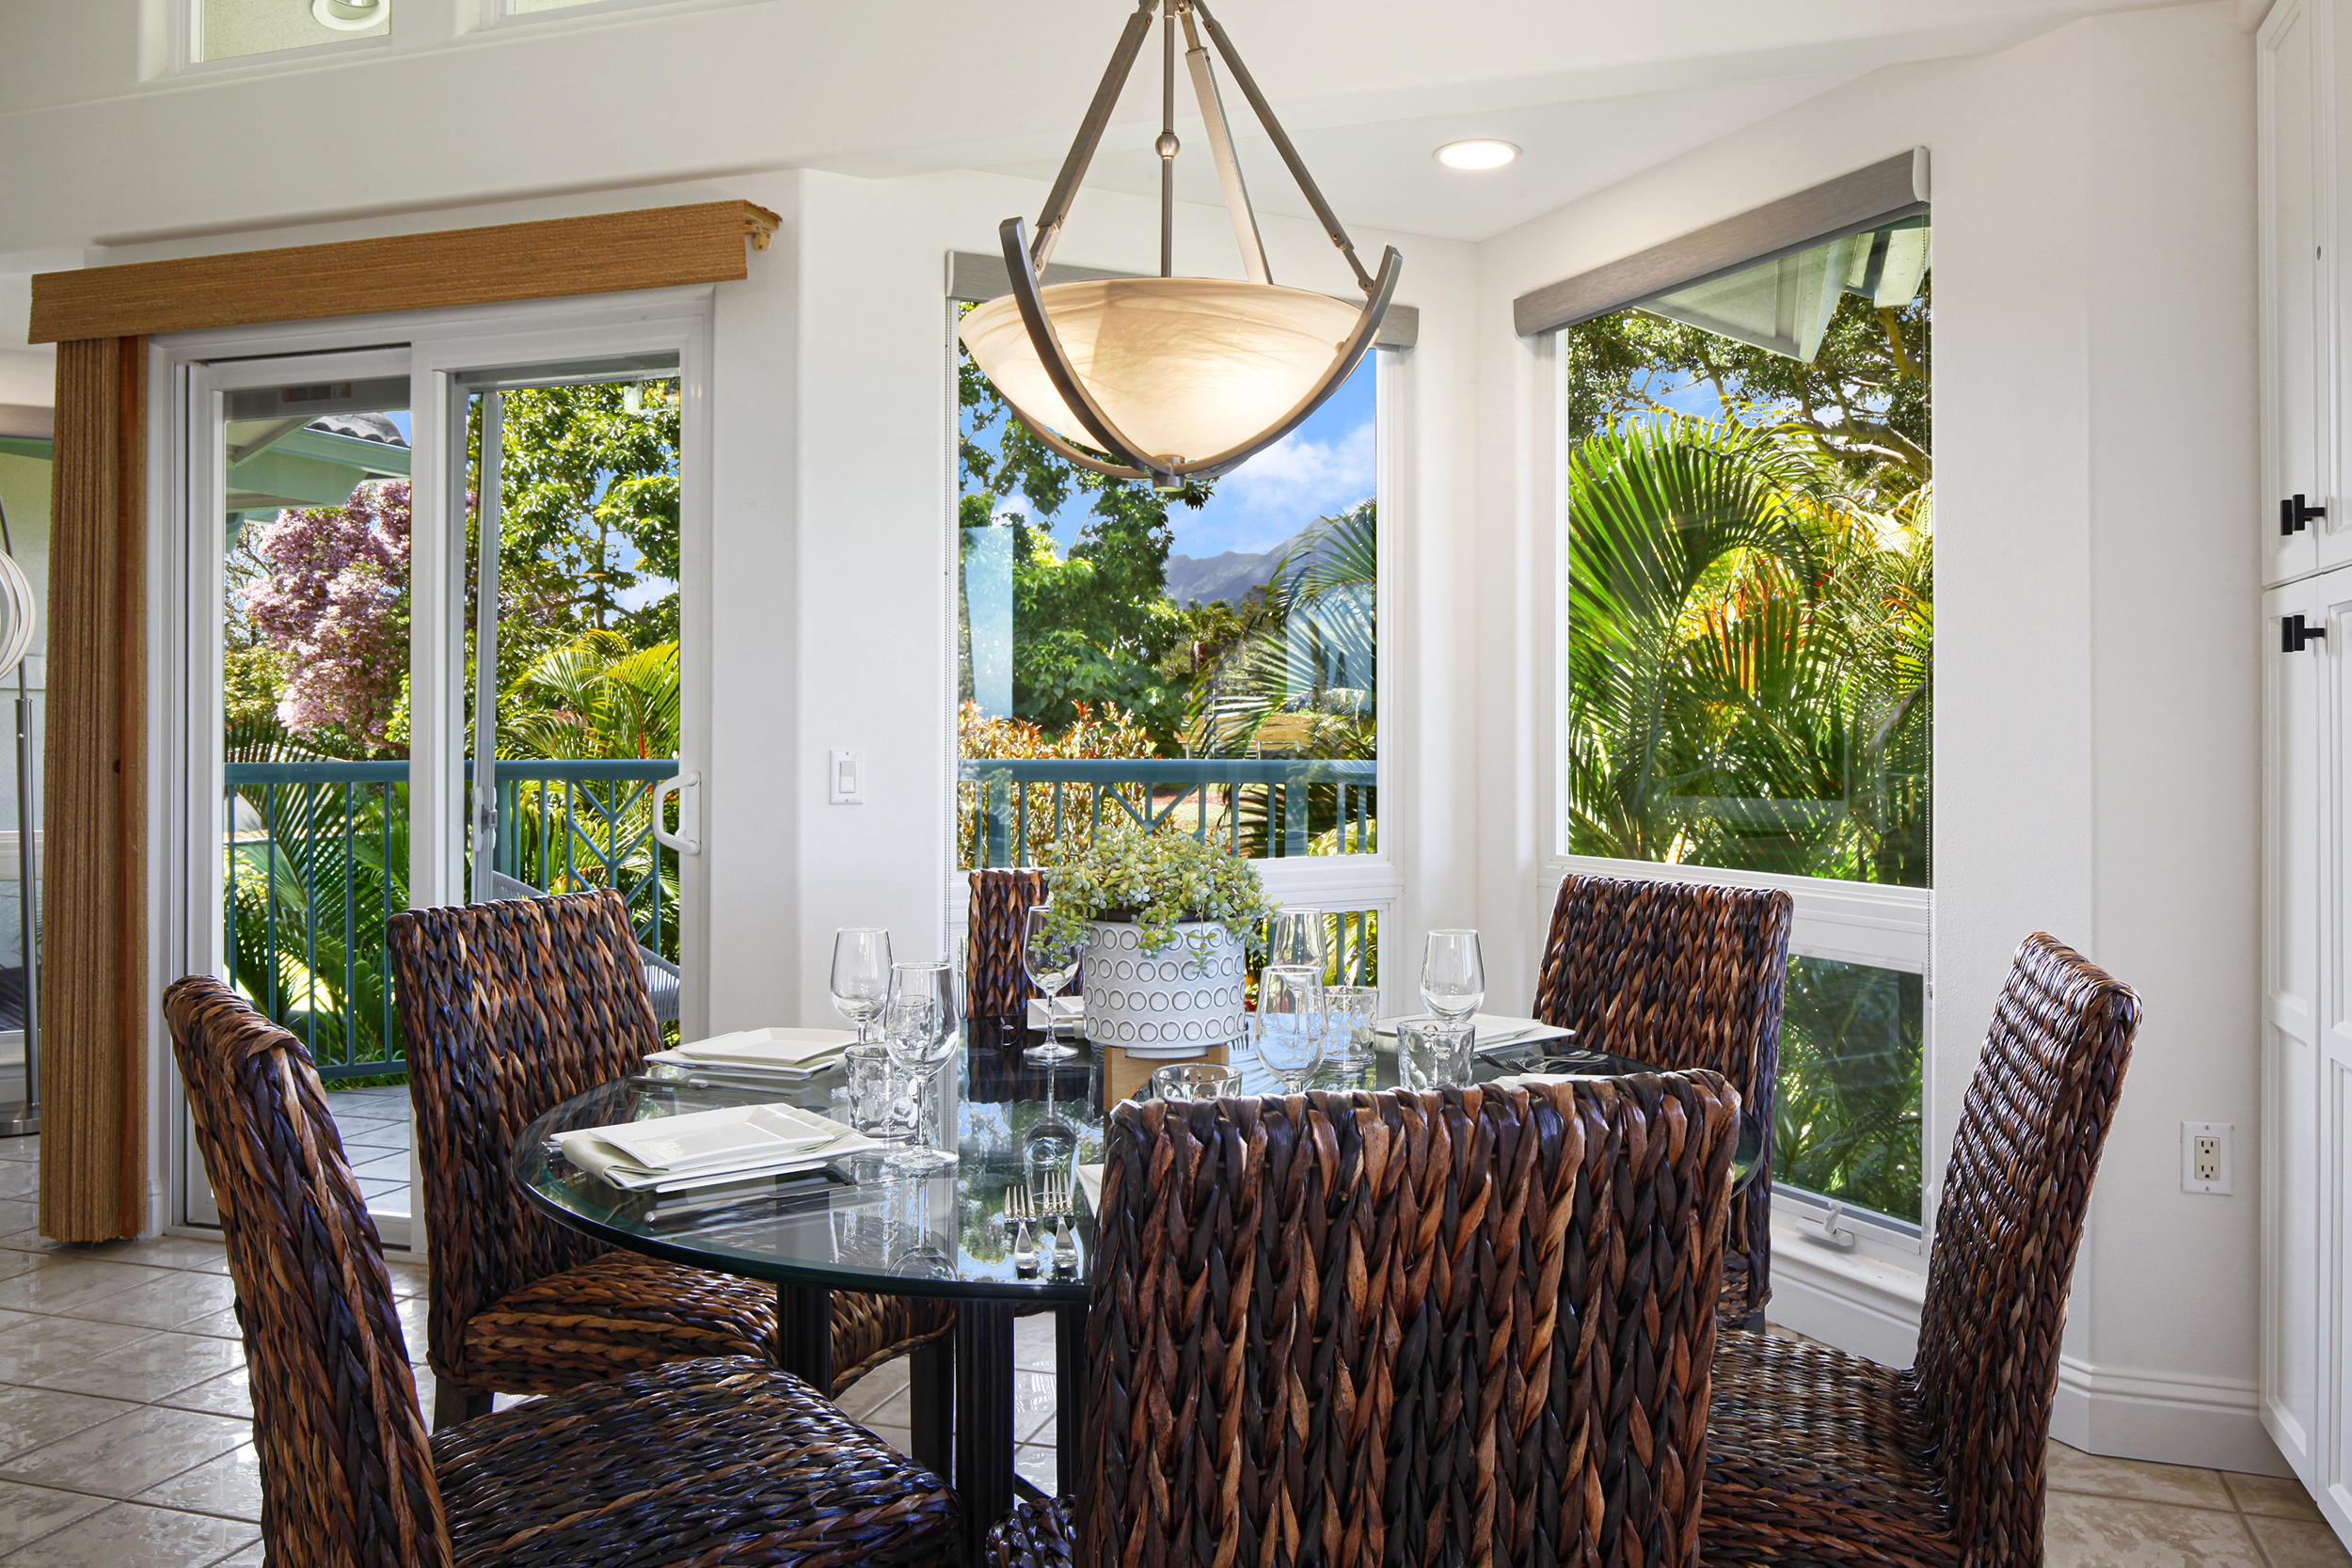 The dining area comfortably seats 6 and has gorgeous views of the tropical landscape